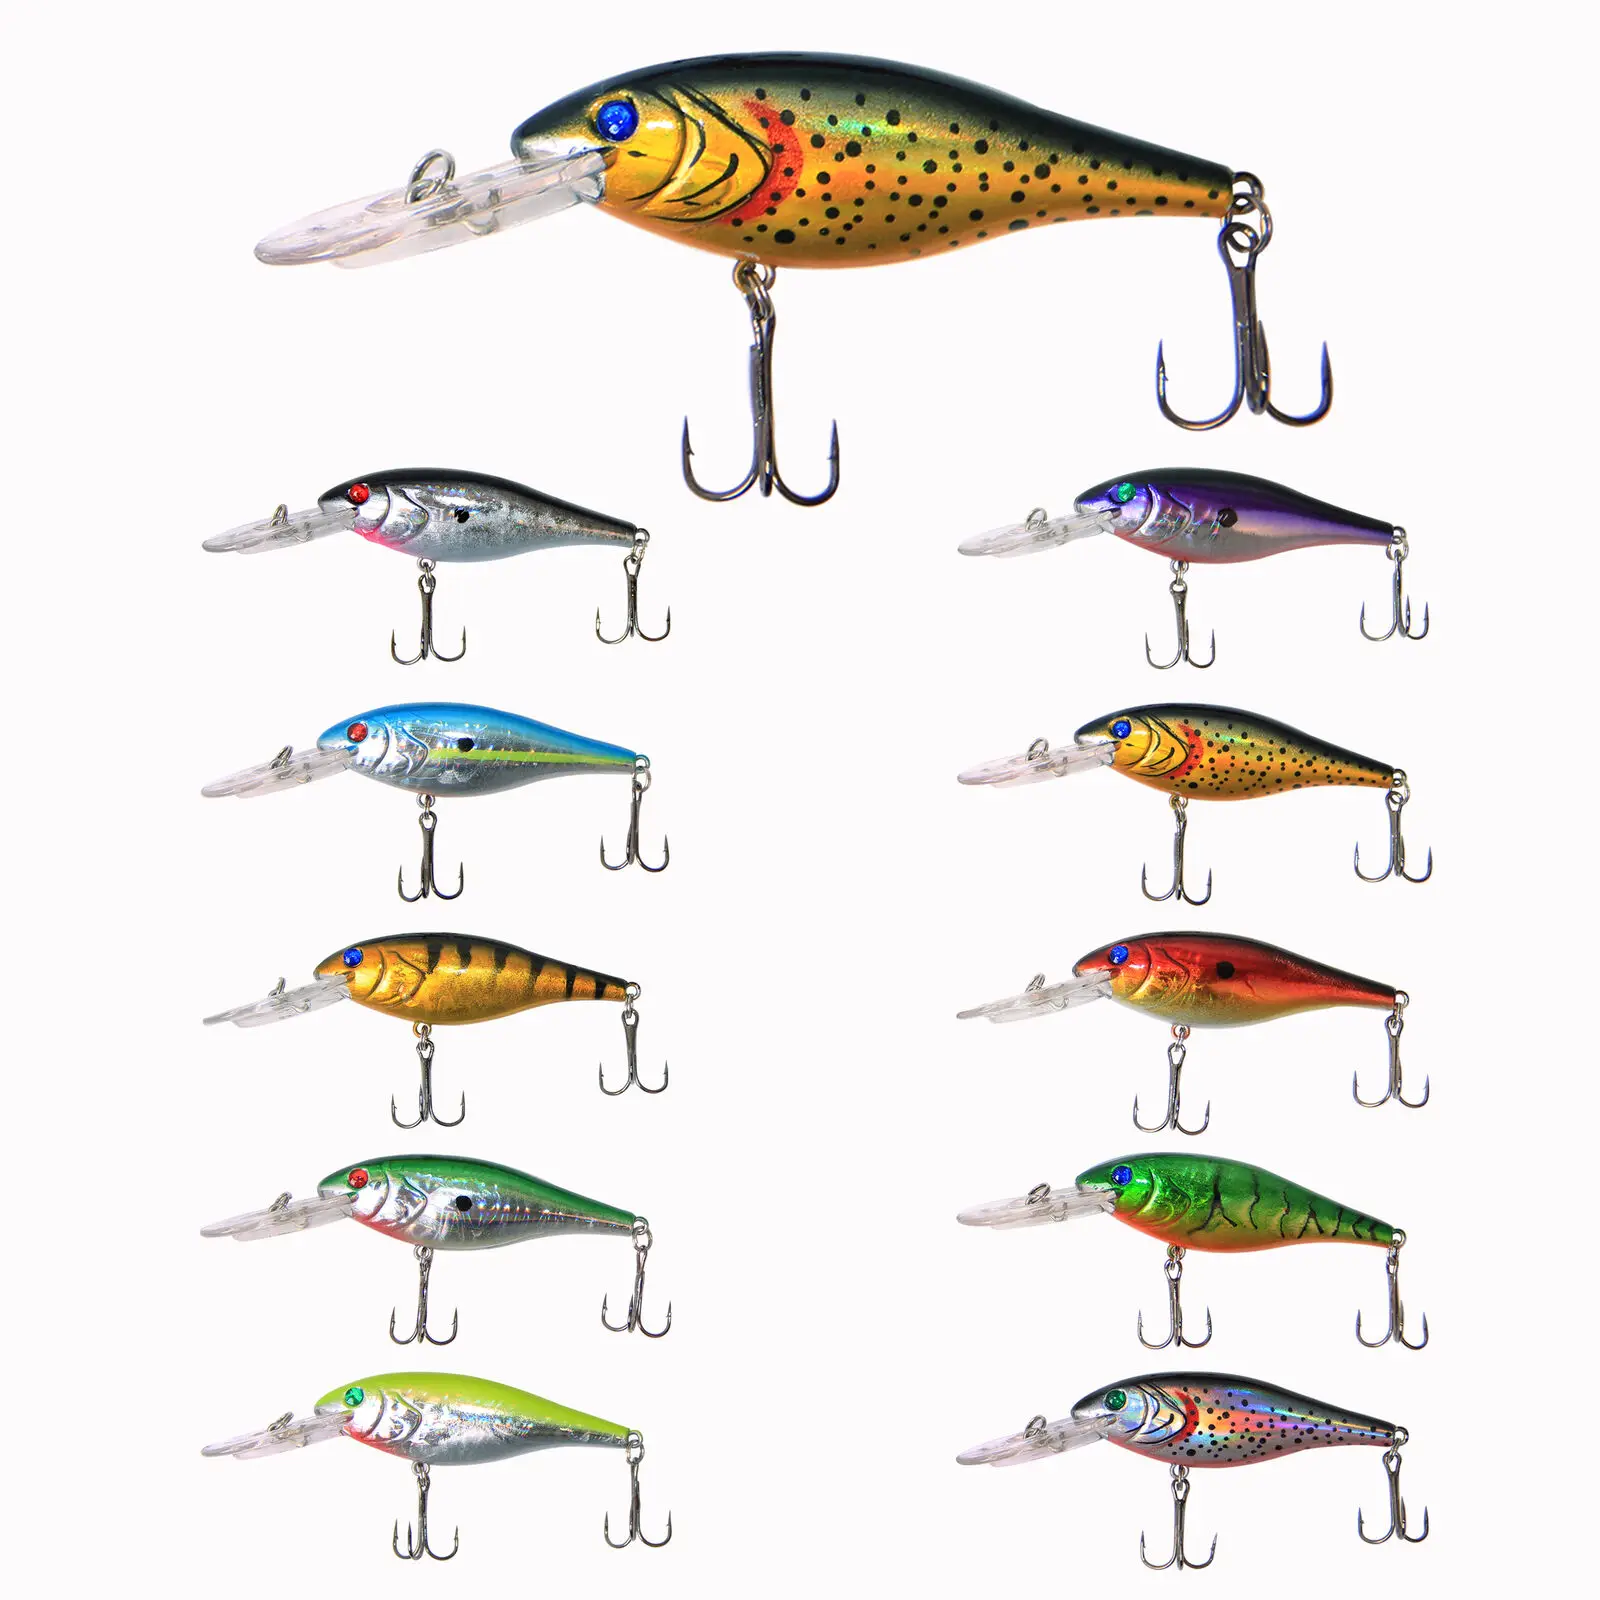 

Mixed Colors Artificial Baits Hard Fishing Lure Kit Crankbaits Minnow Saltwater Lures  10.2g Hooks 6#